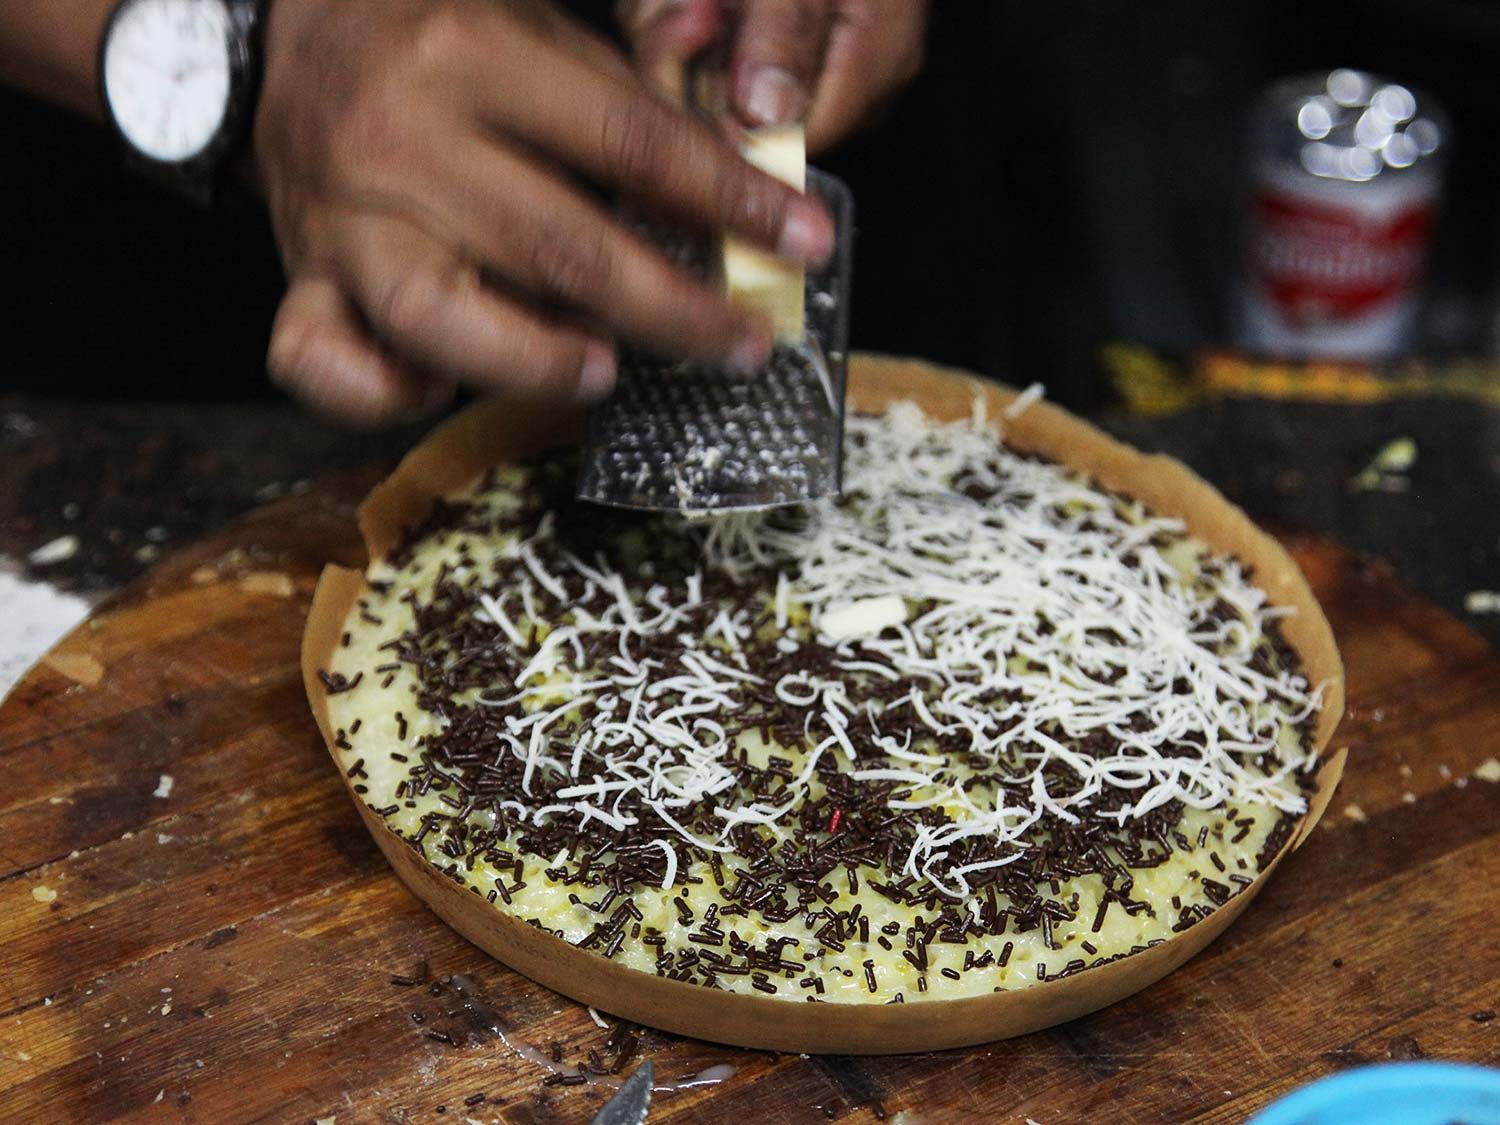 Grated fresh cheese slowly melting into the chocolate sprinkles is heaven.